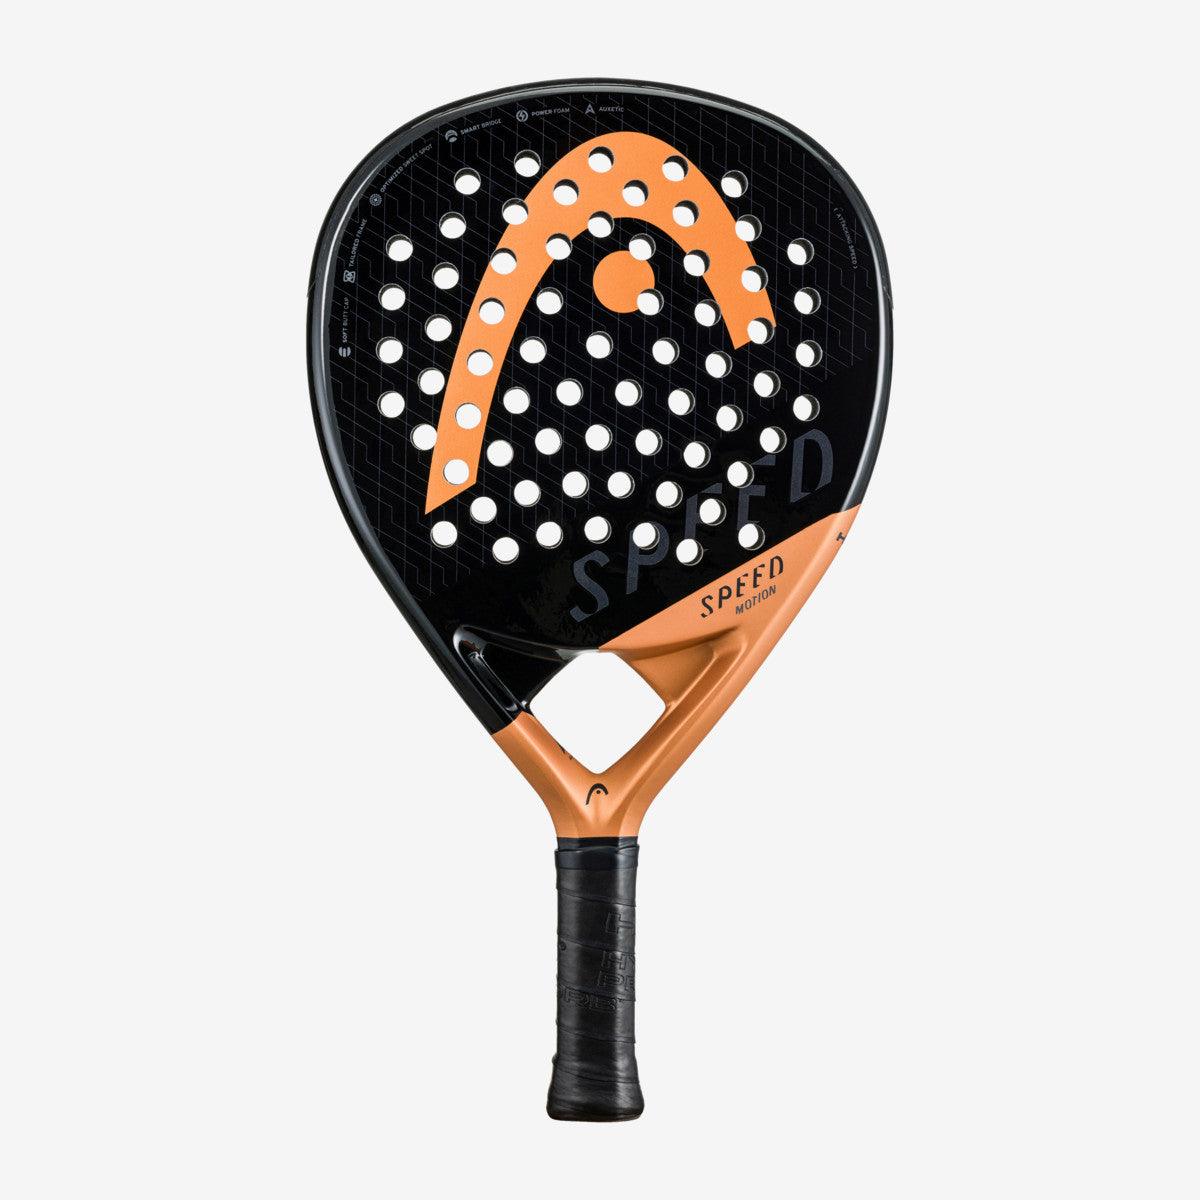 Best-Quality Babolat Padel Rackets for all Level Players - Padel USA